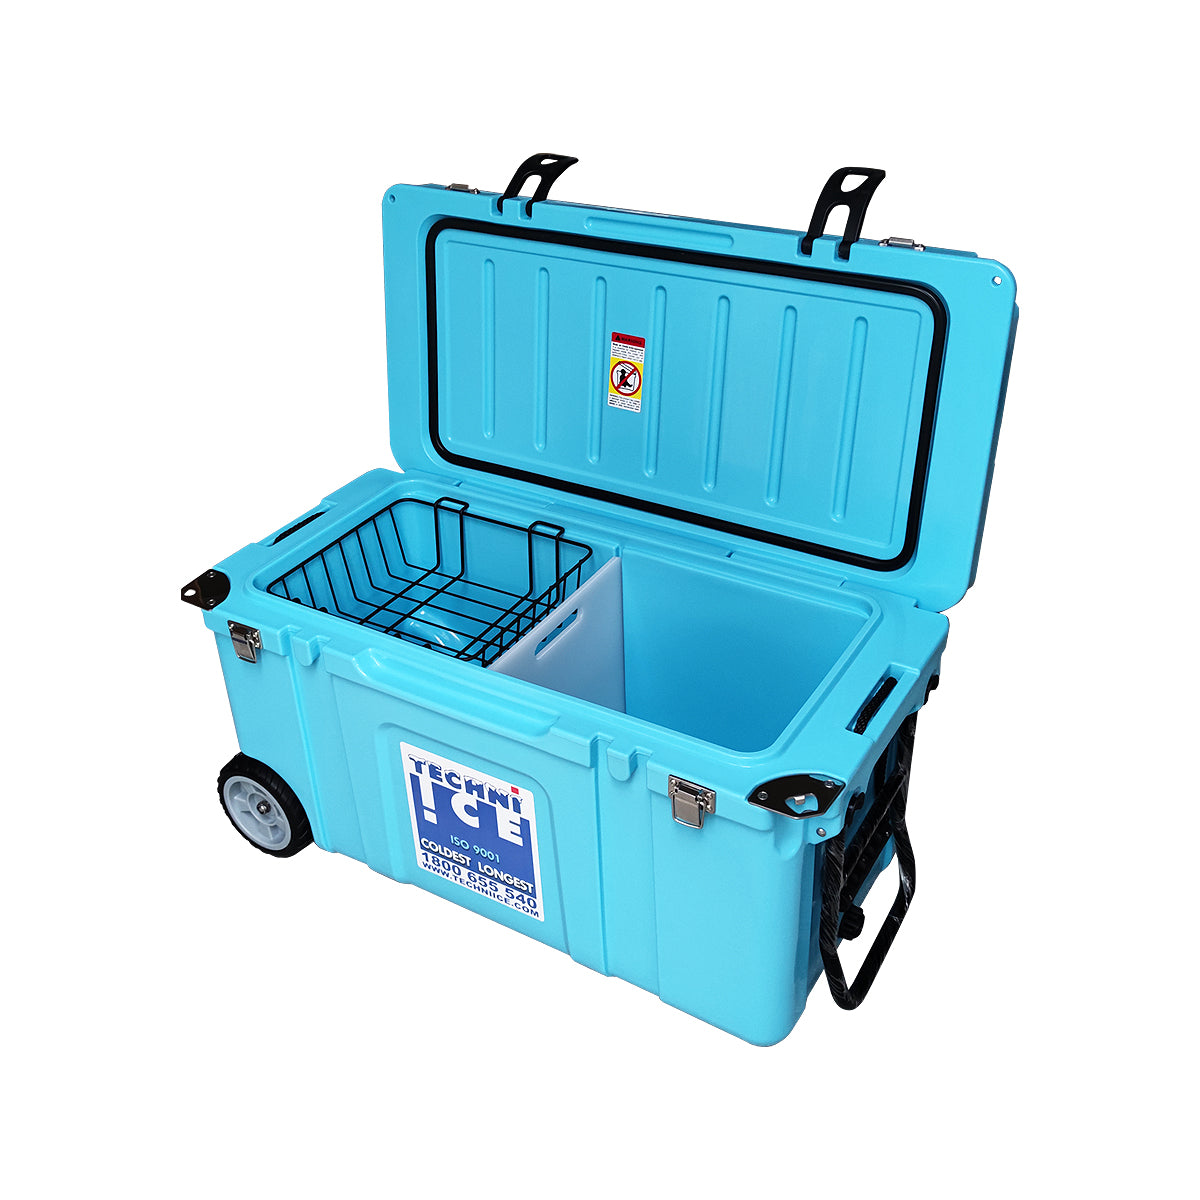 Techni Ice Signature Hardcore Icebox 75L Light Blue Wheels *PREORDER FOR JULY DISPATCH *FREE 12 REUSABLE DRY ICE PACKS VALUES $59.95